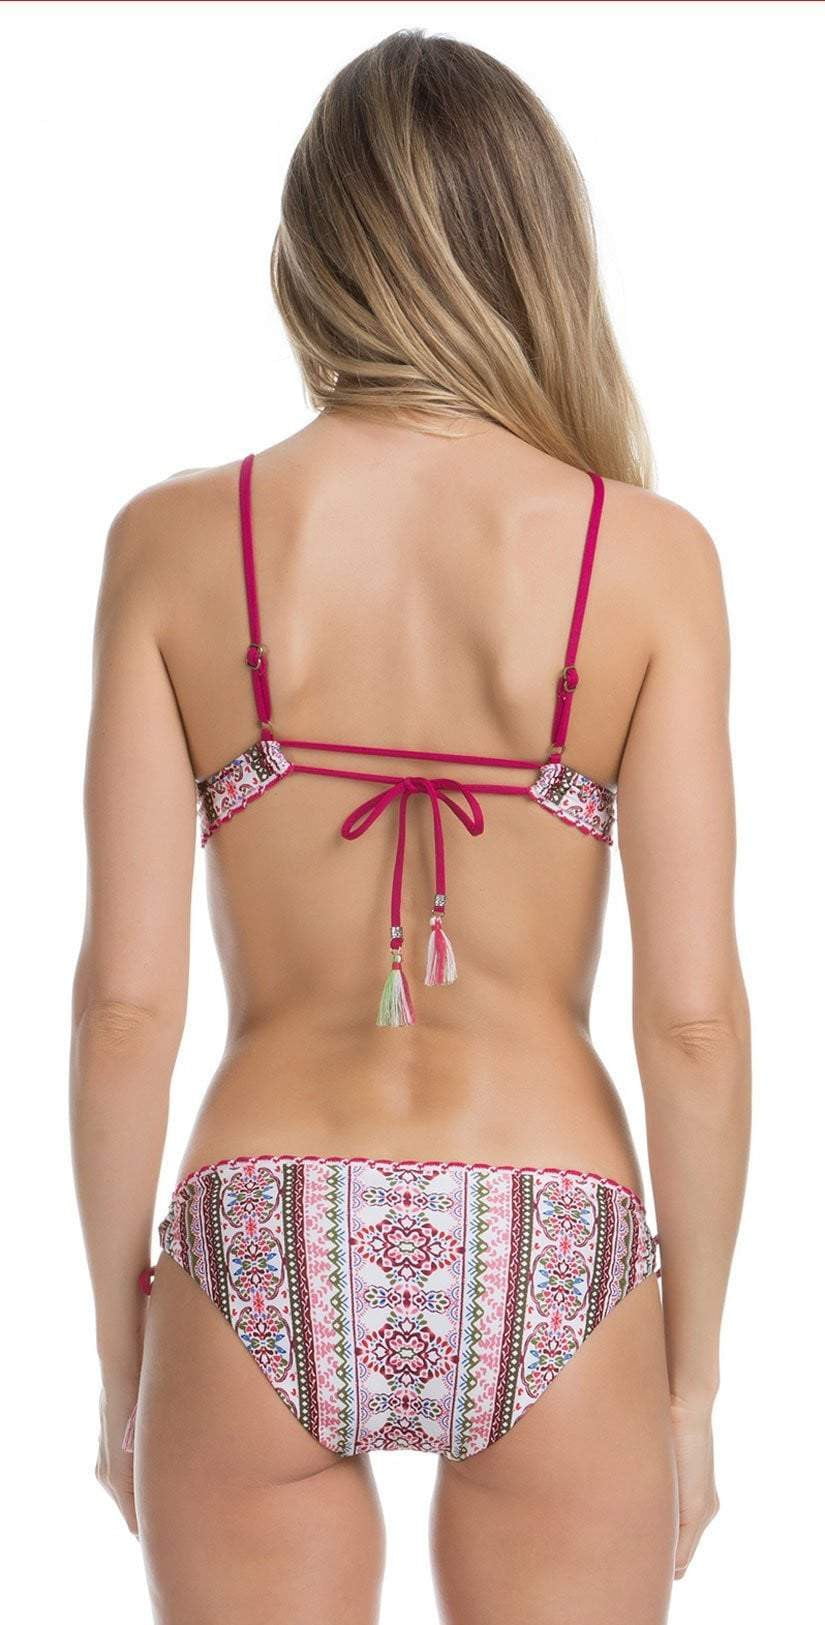 South Beach Swimsuits Becca Swimsuits and Bikinis – South Beach Swimsuits